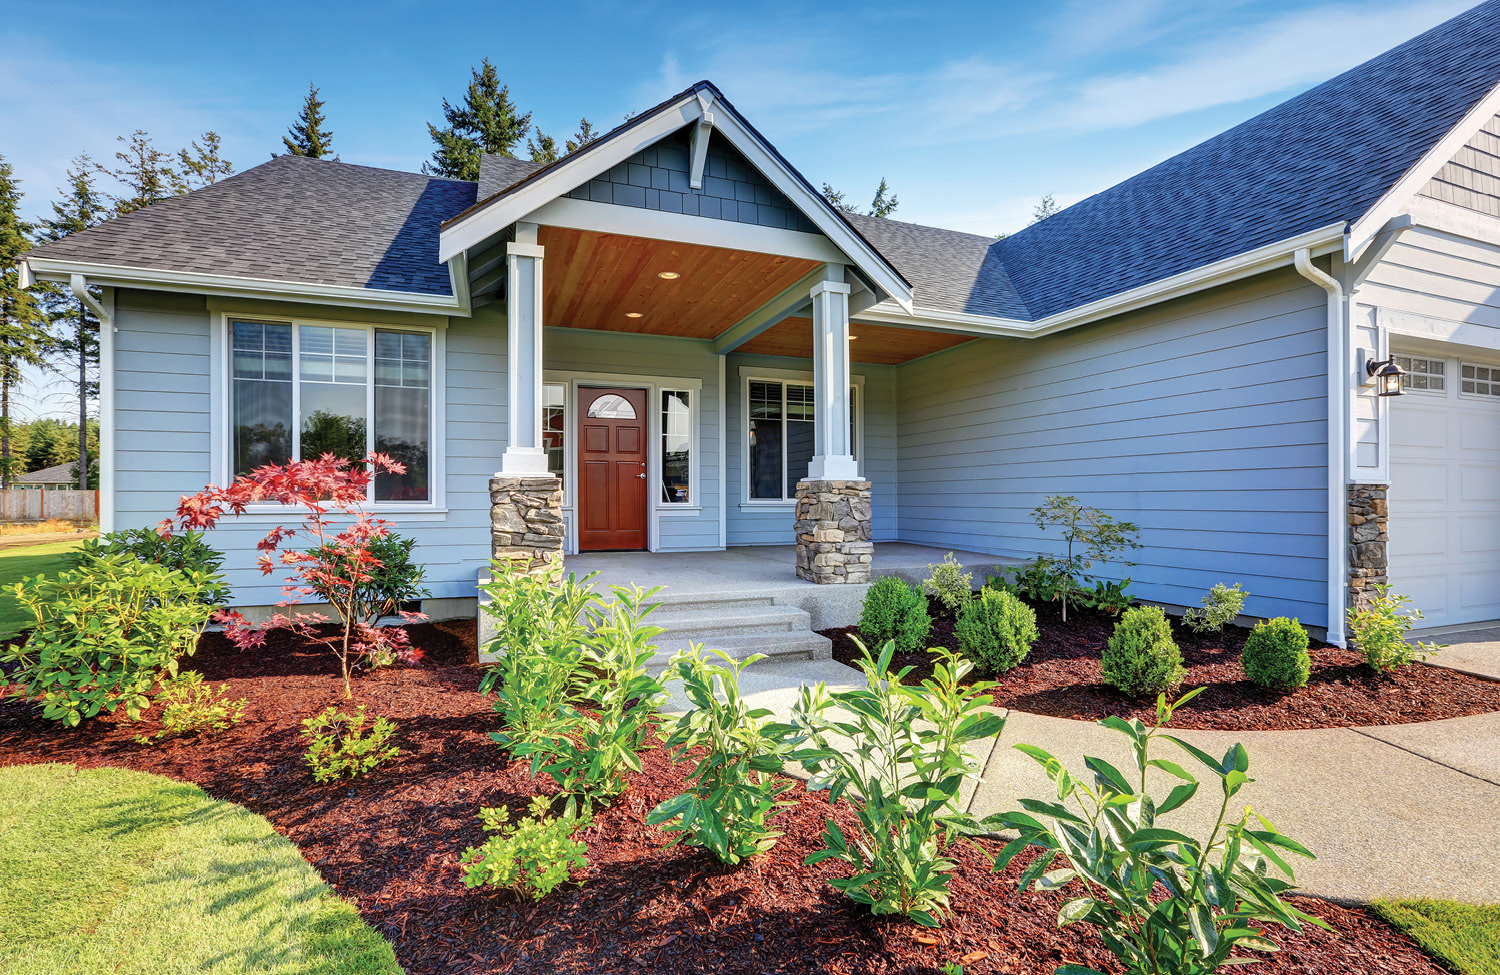 Spring Landscaping Ideas to Boost Curb Appeal